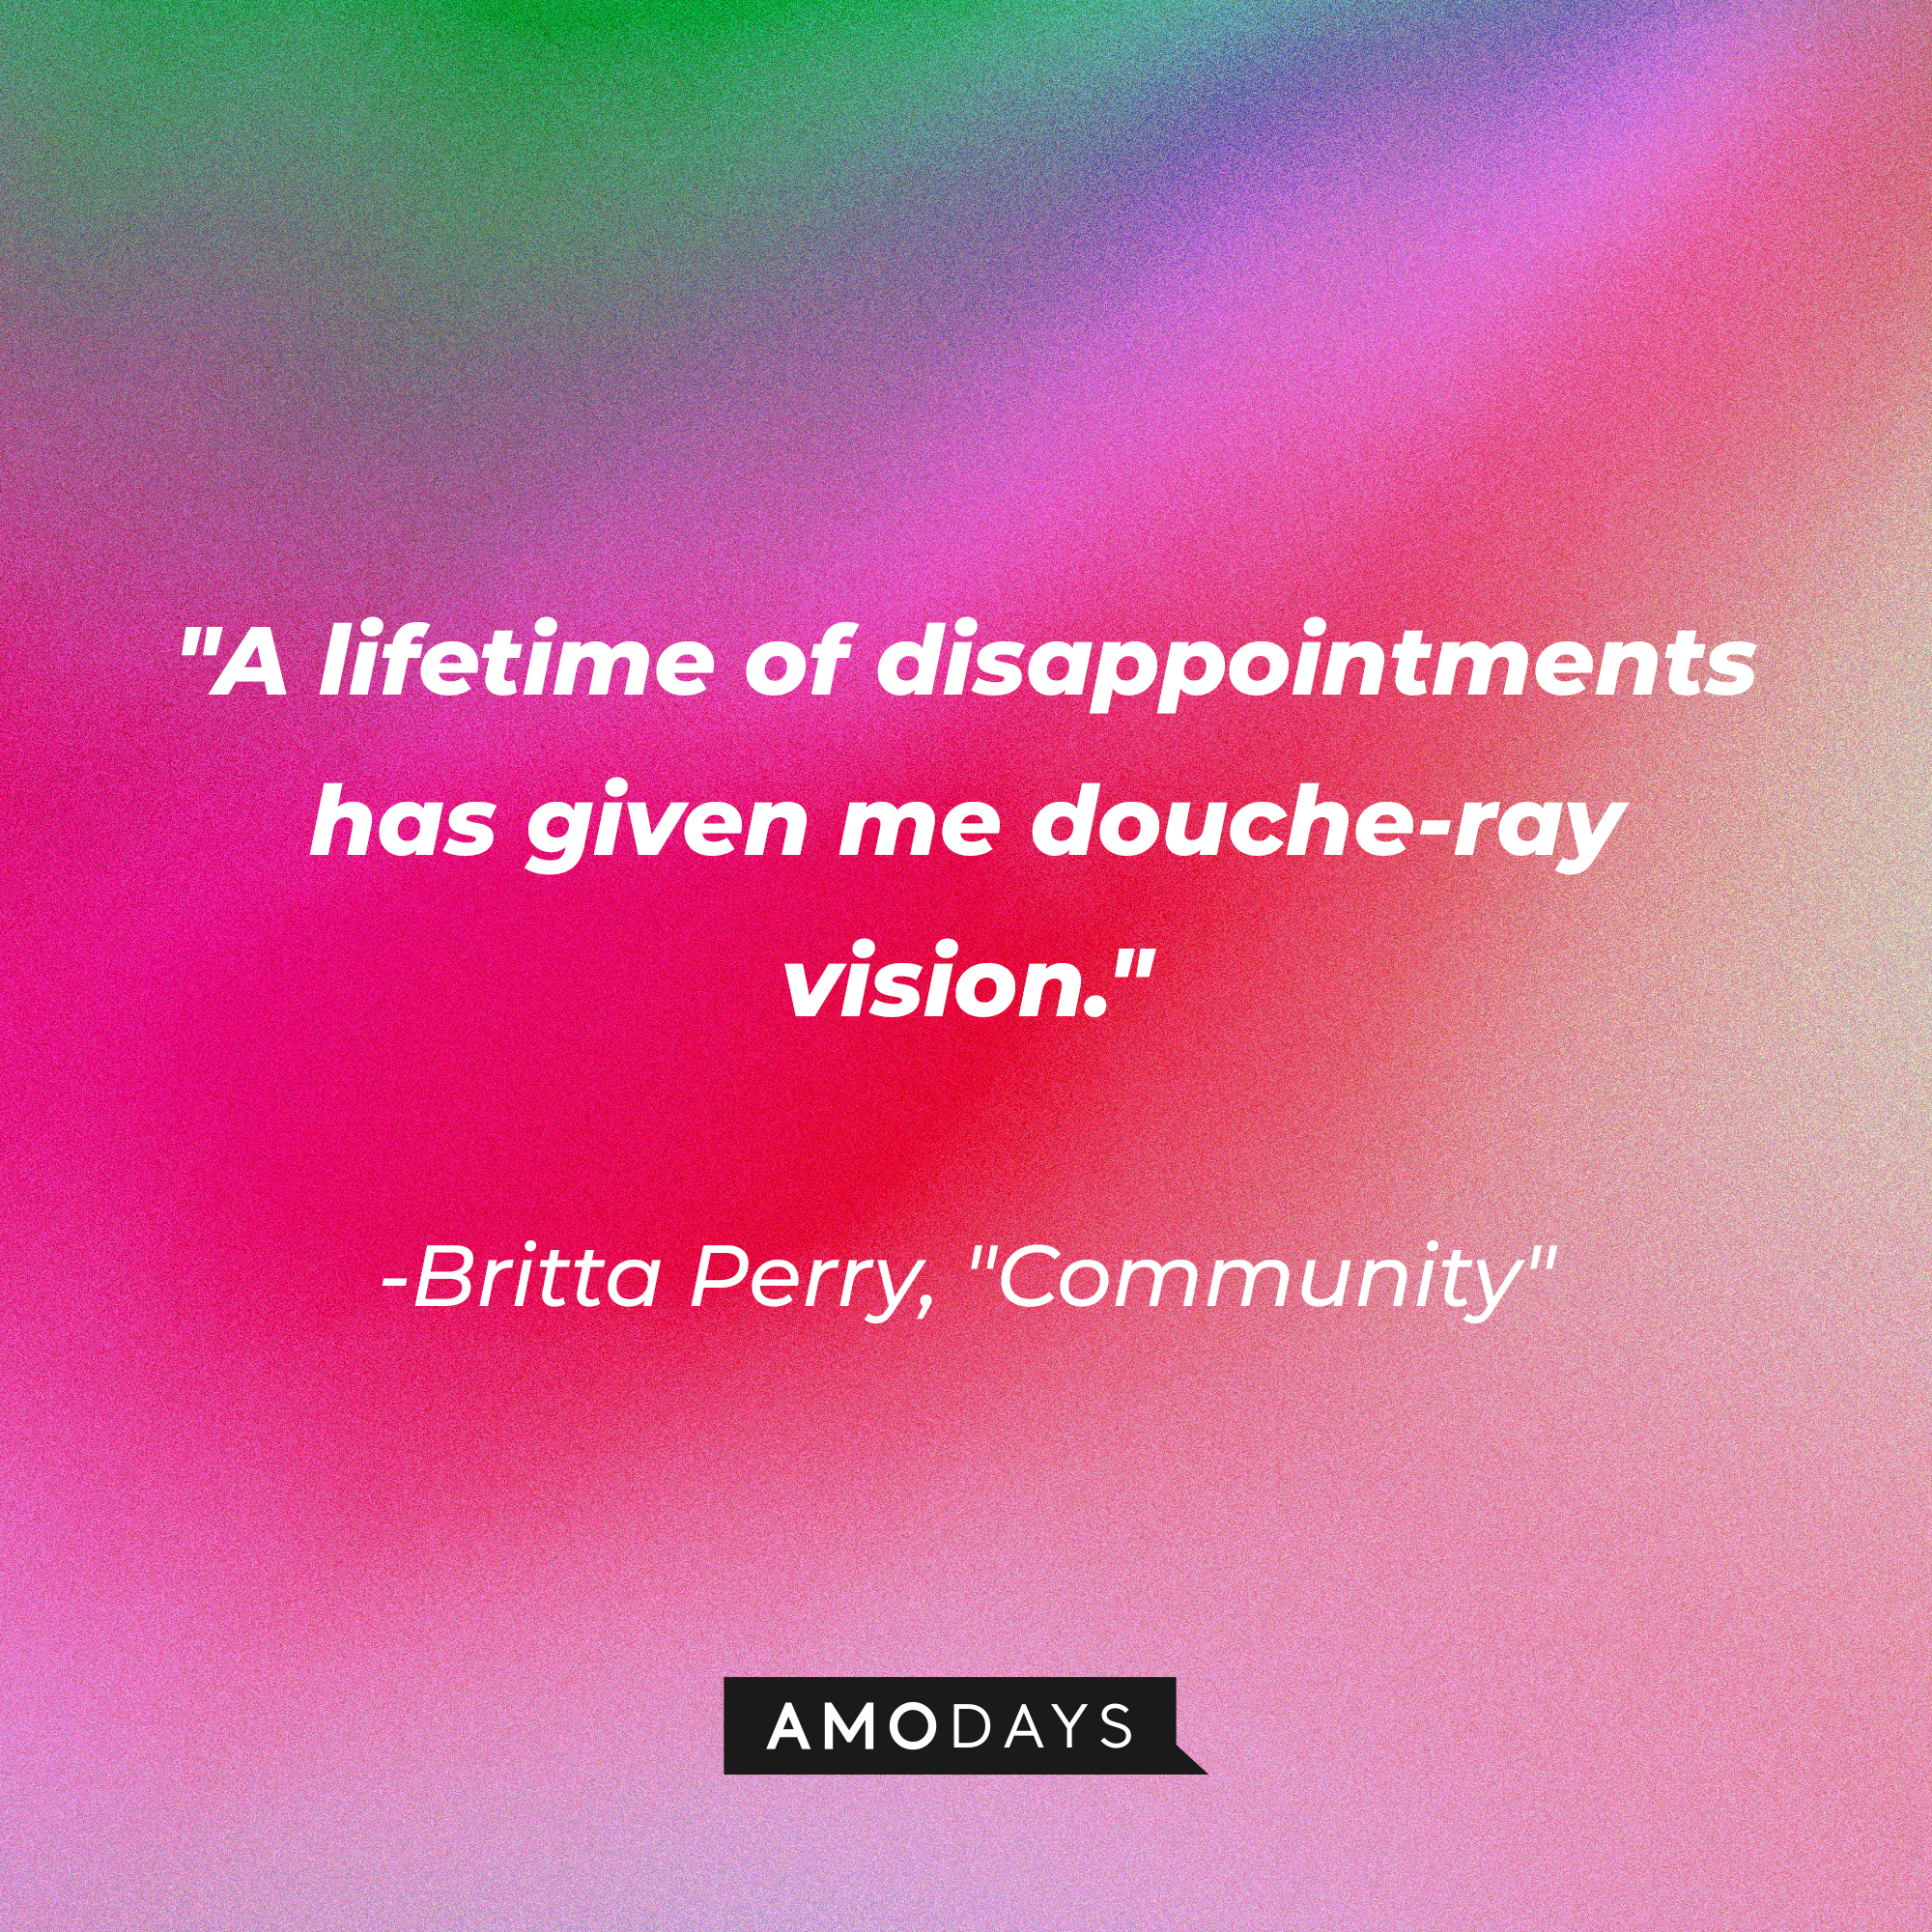 Britta Perry's quote: "A lifetime of disappointments has given me douche-ray vision." | Source: Amodays